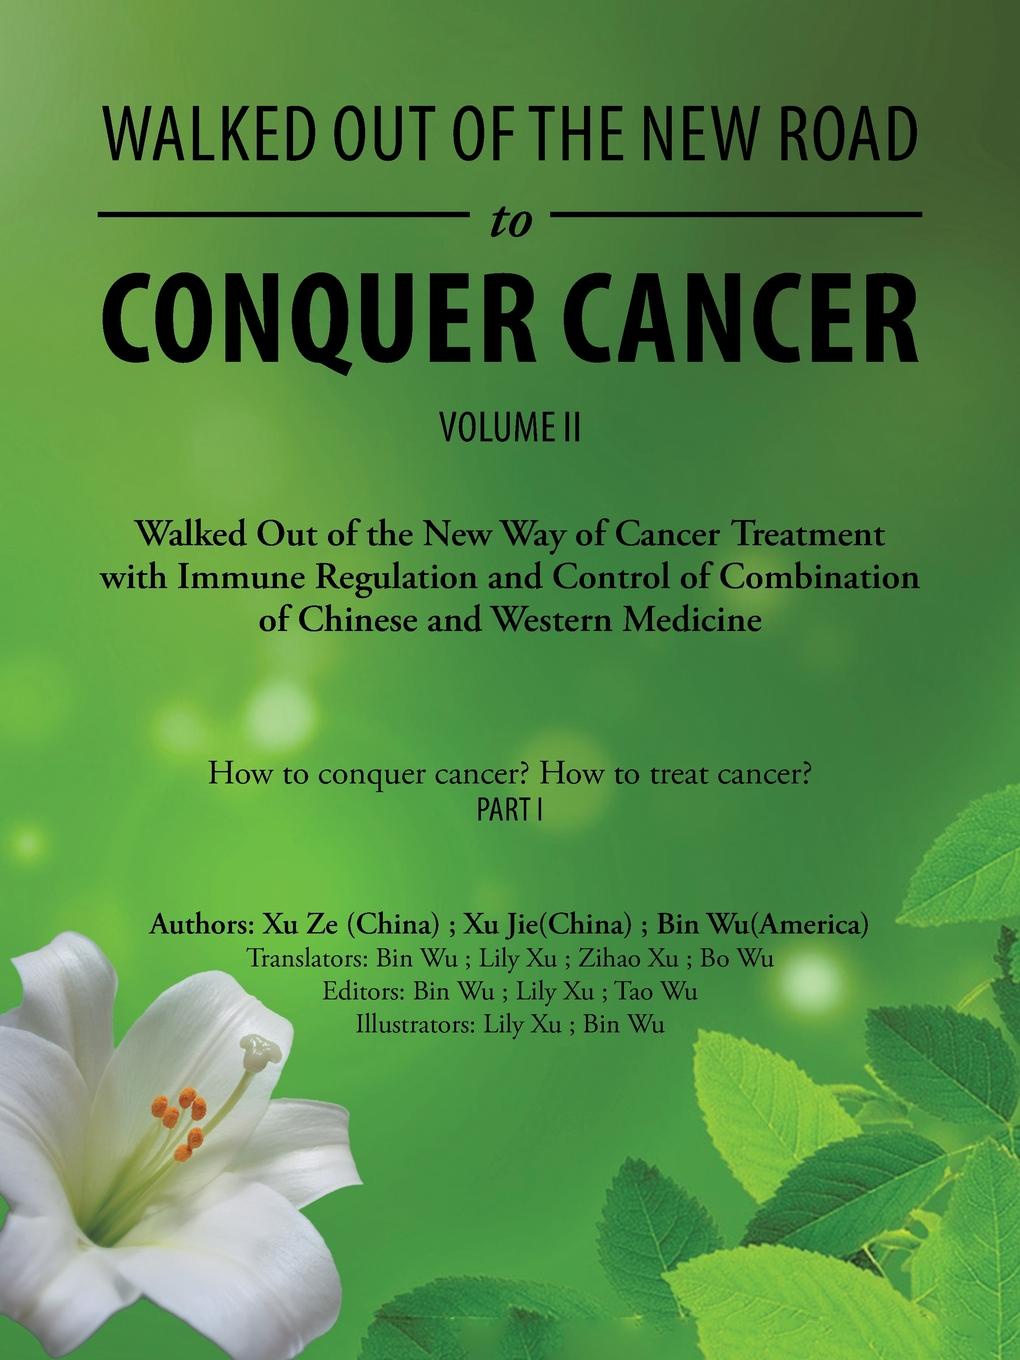 Walked out of the New Road to Conquer Cancer. Walked out of the New Way of Cancer Treatment with Immune Regulation and Control of Combination of Chinese and Western Medicine